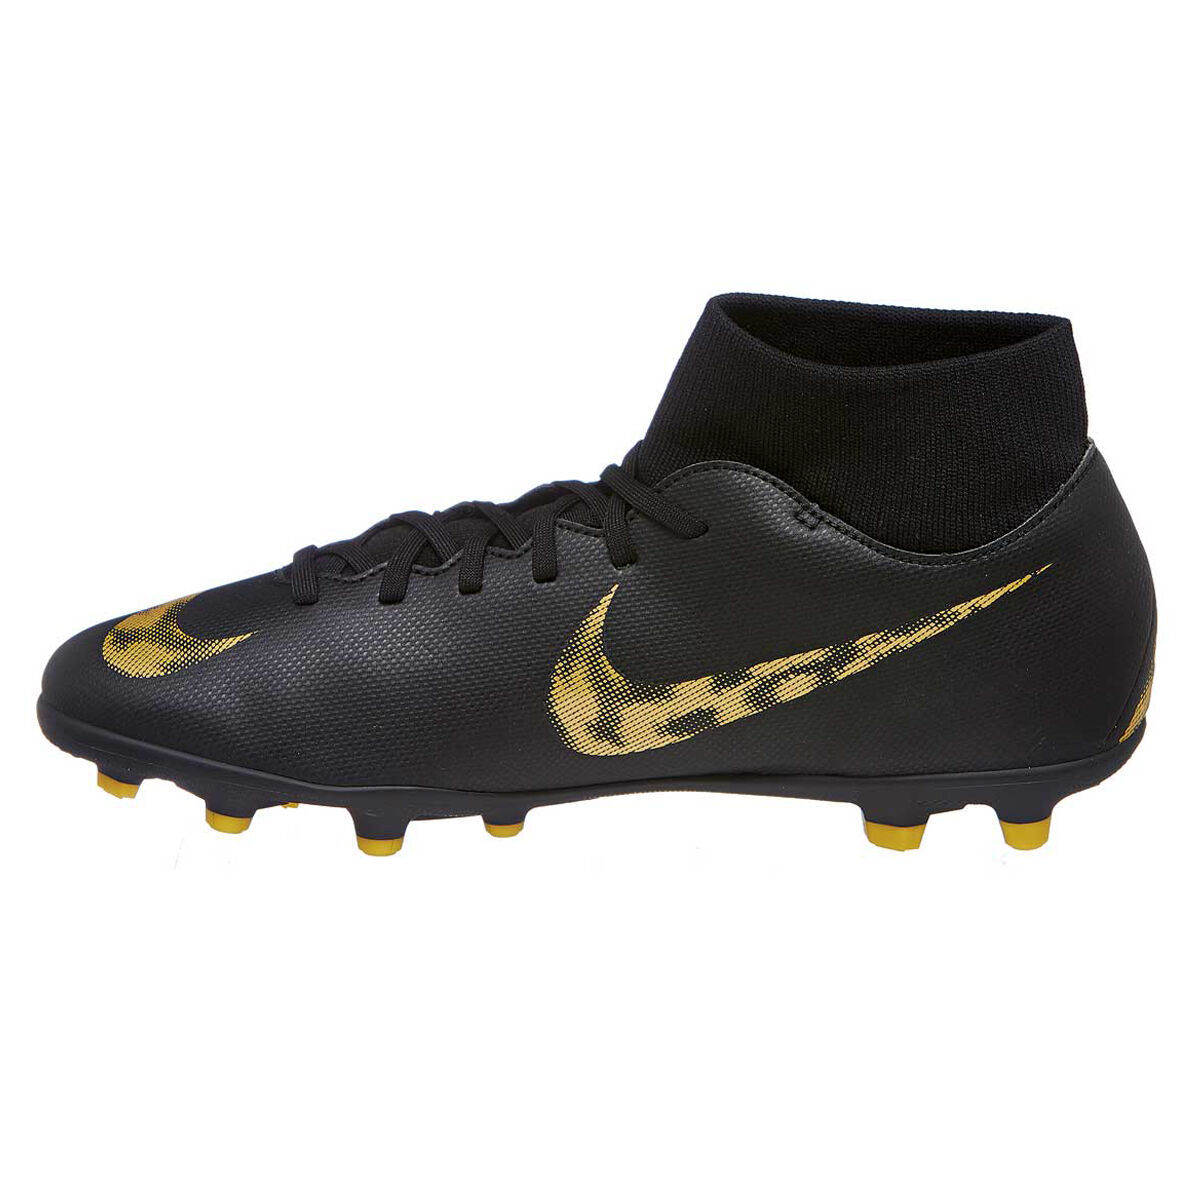 Nike Men's Mercurial Superfly 6 Pro LVL UP FG Soccer Cleat